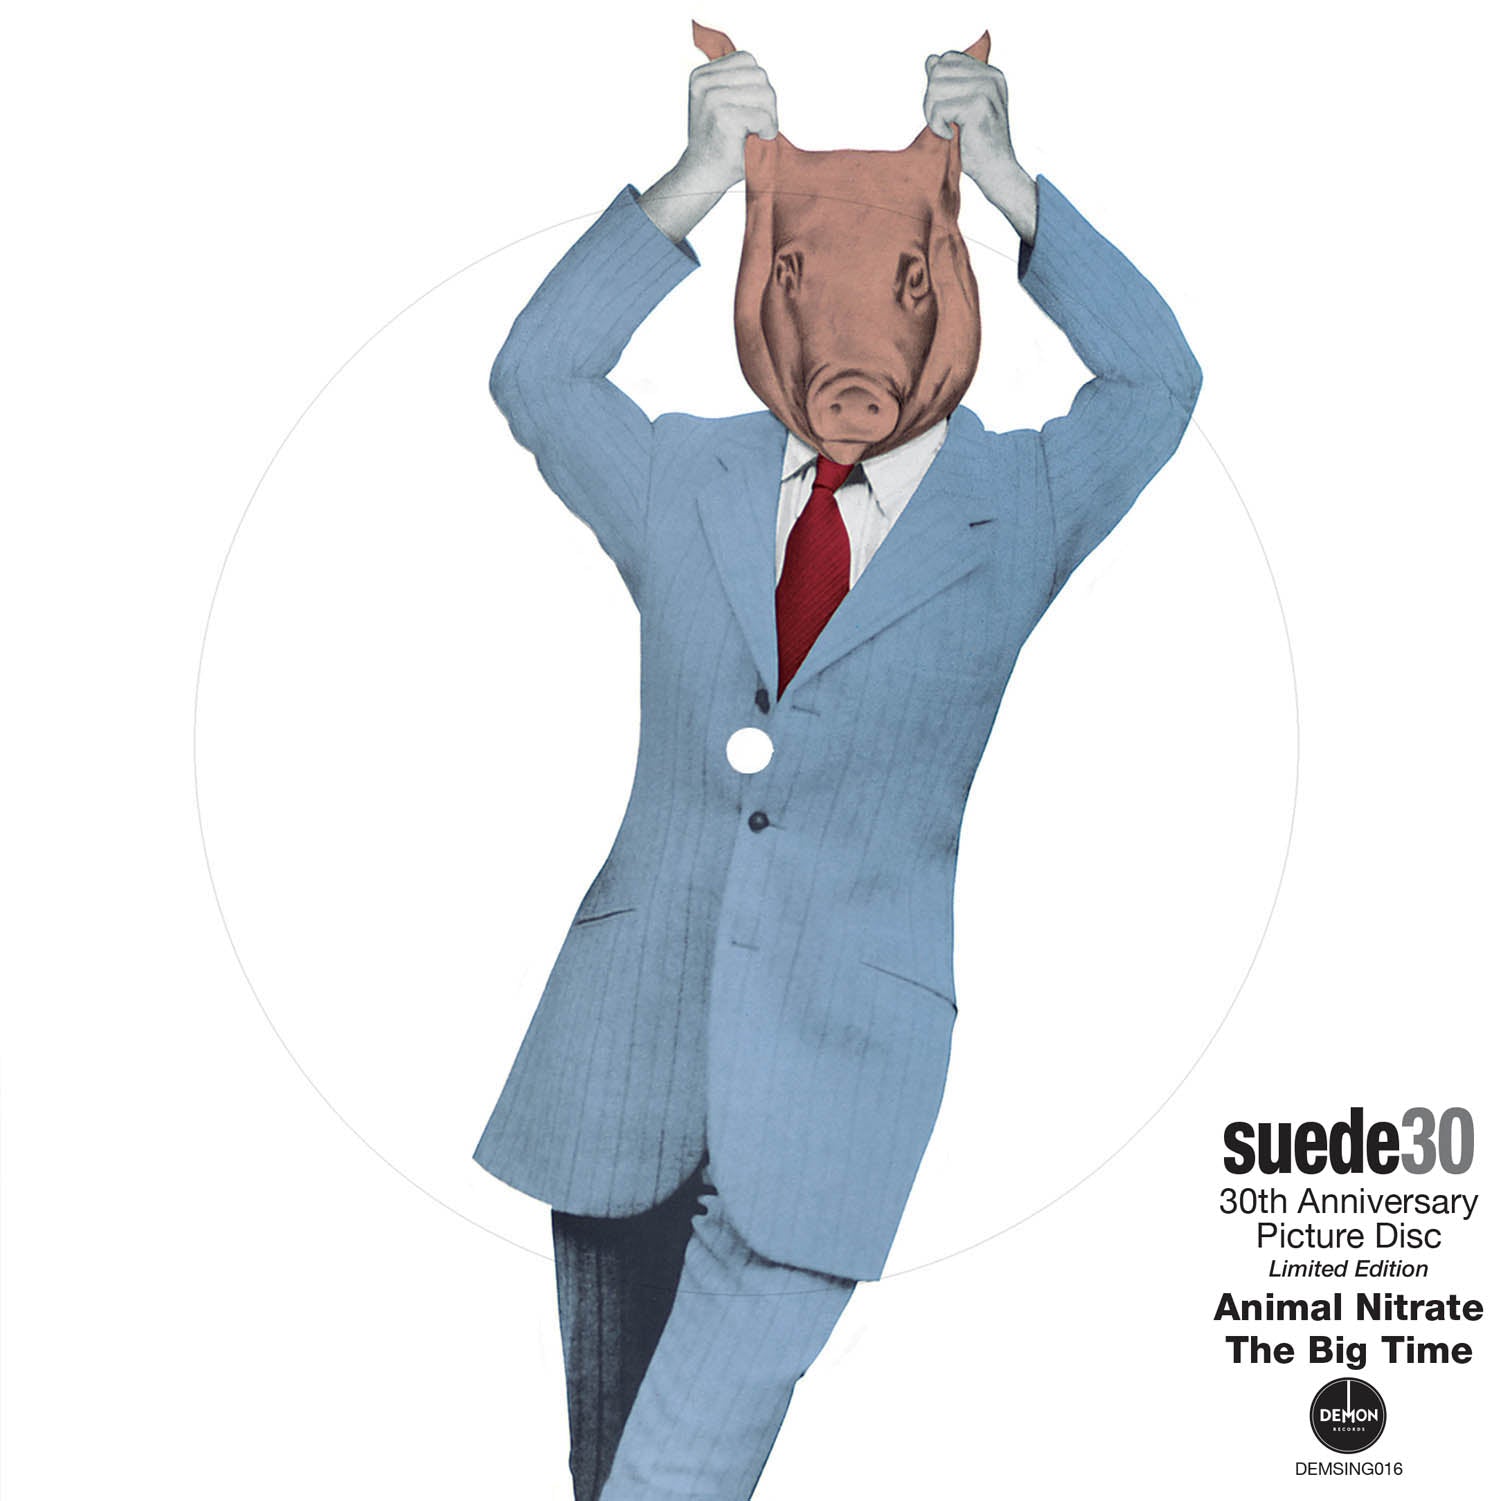 Suede - Animal Nitrate (30th Anniversary Edition): Limited Vinyl 7" Picture Disc